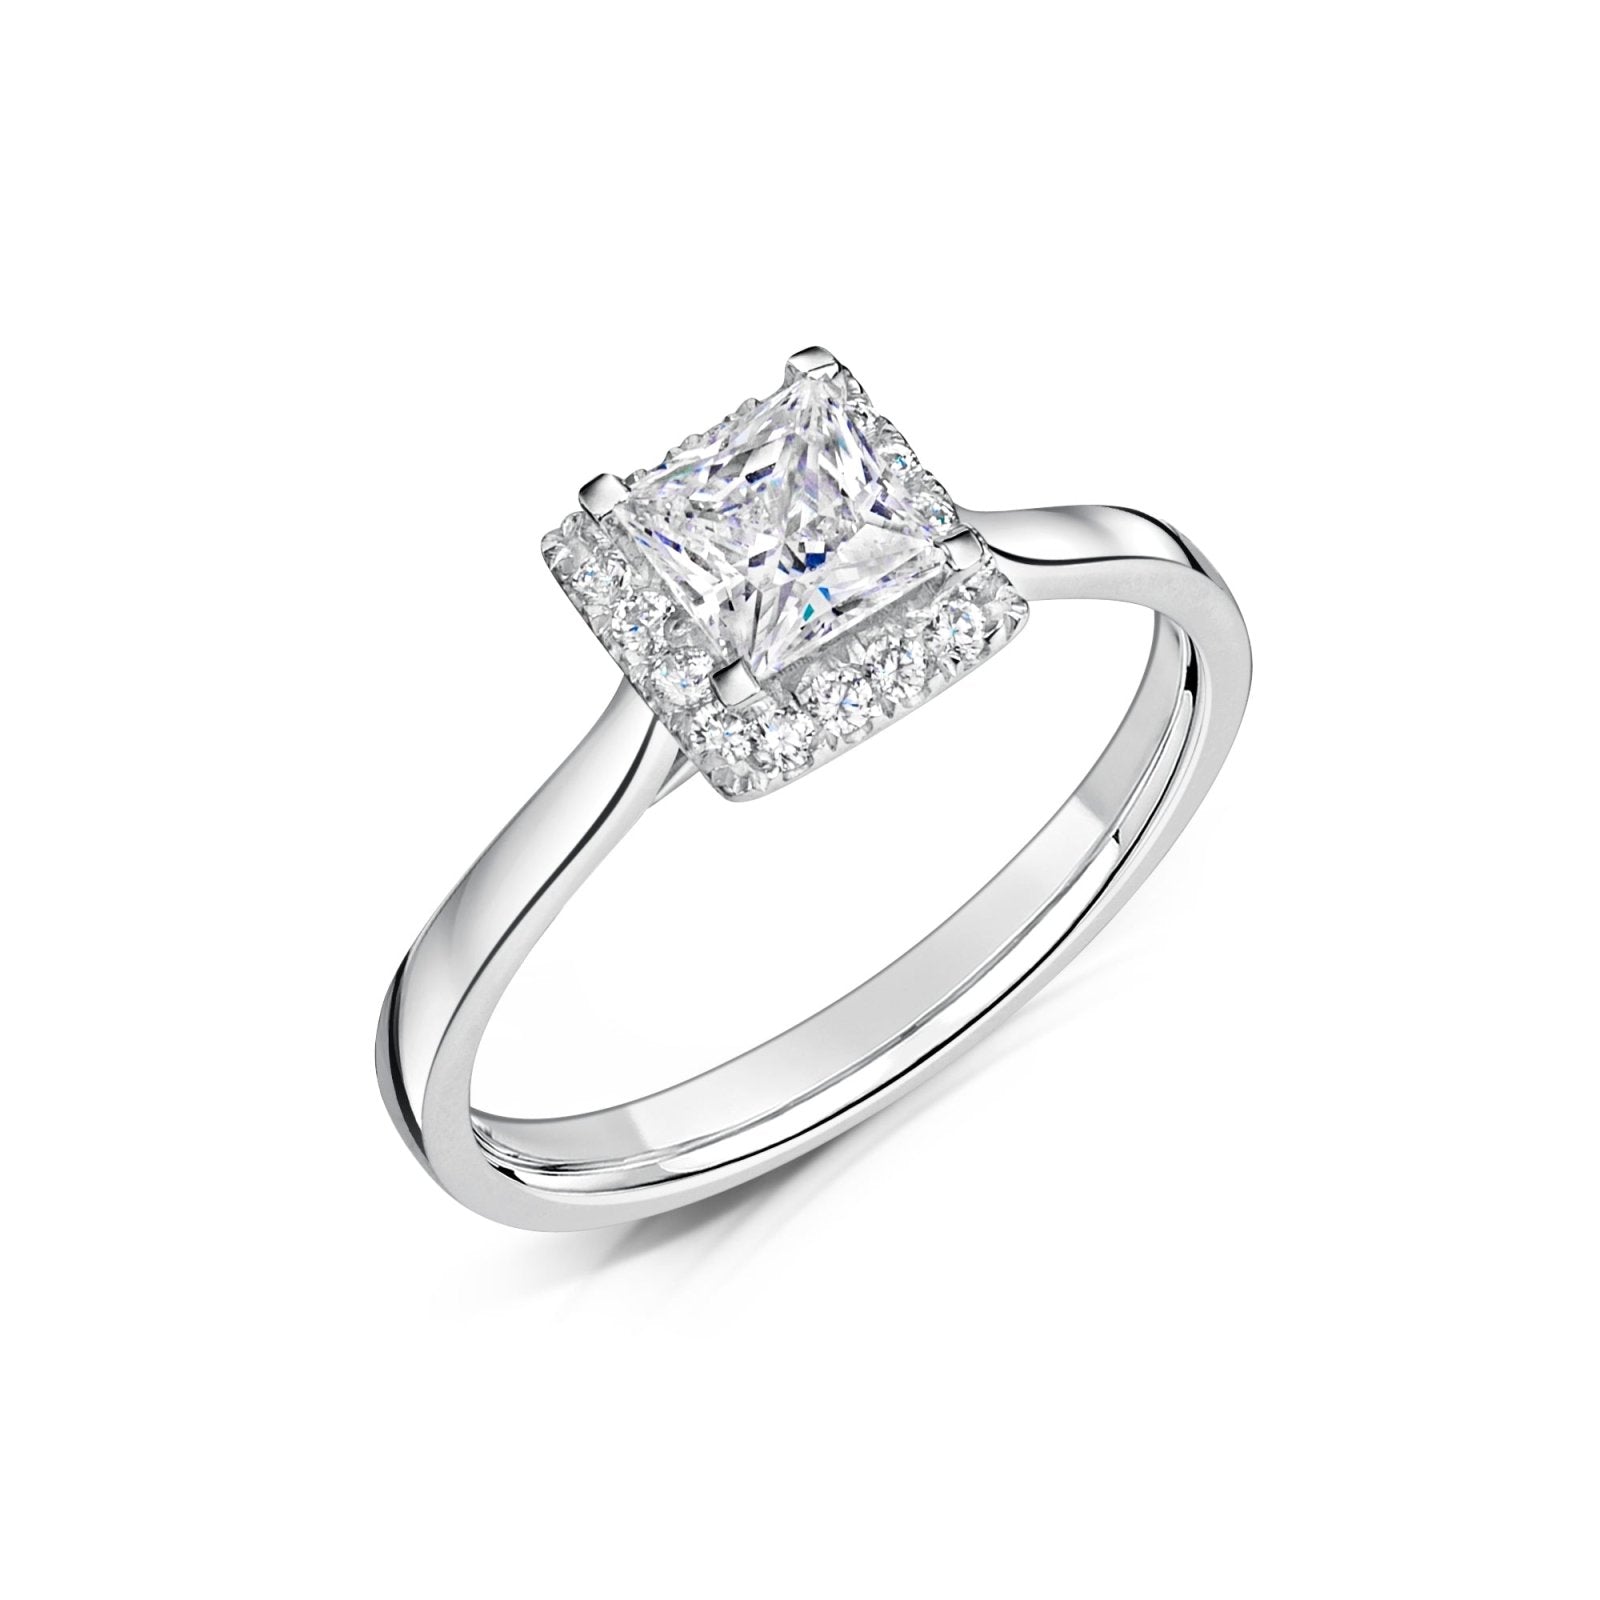 Princess Cut Diamond Halo Cluster Engagement Ring angled top view on white background.